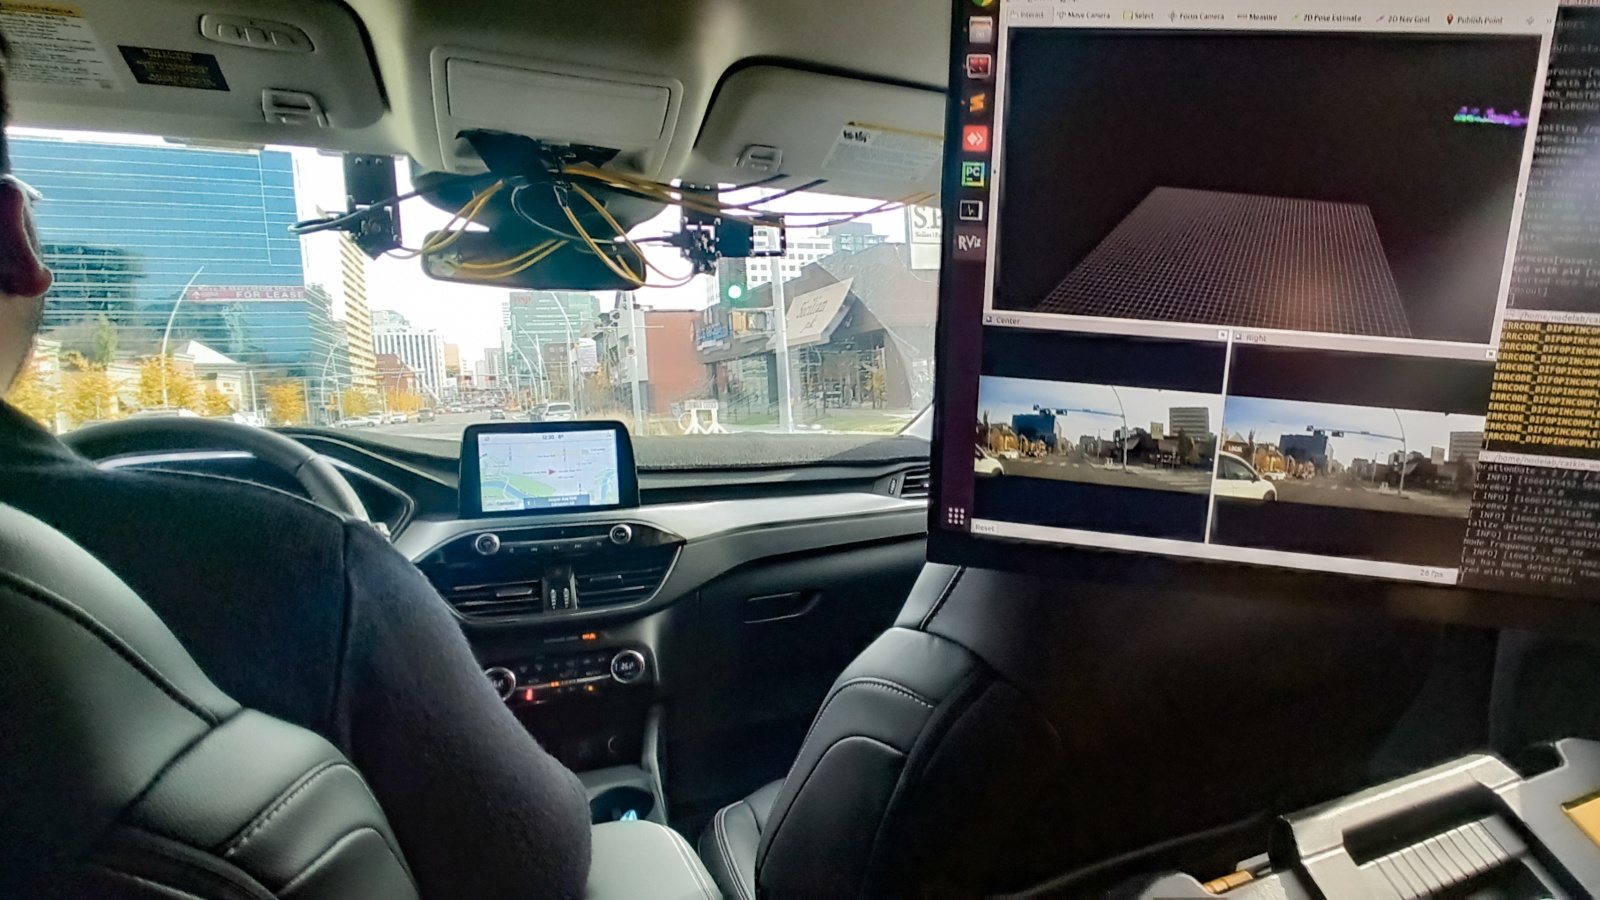 U of A engineering researchers are developing an AI-powered “shared perception” system for autonomous vehicles